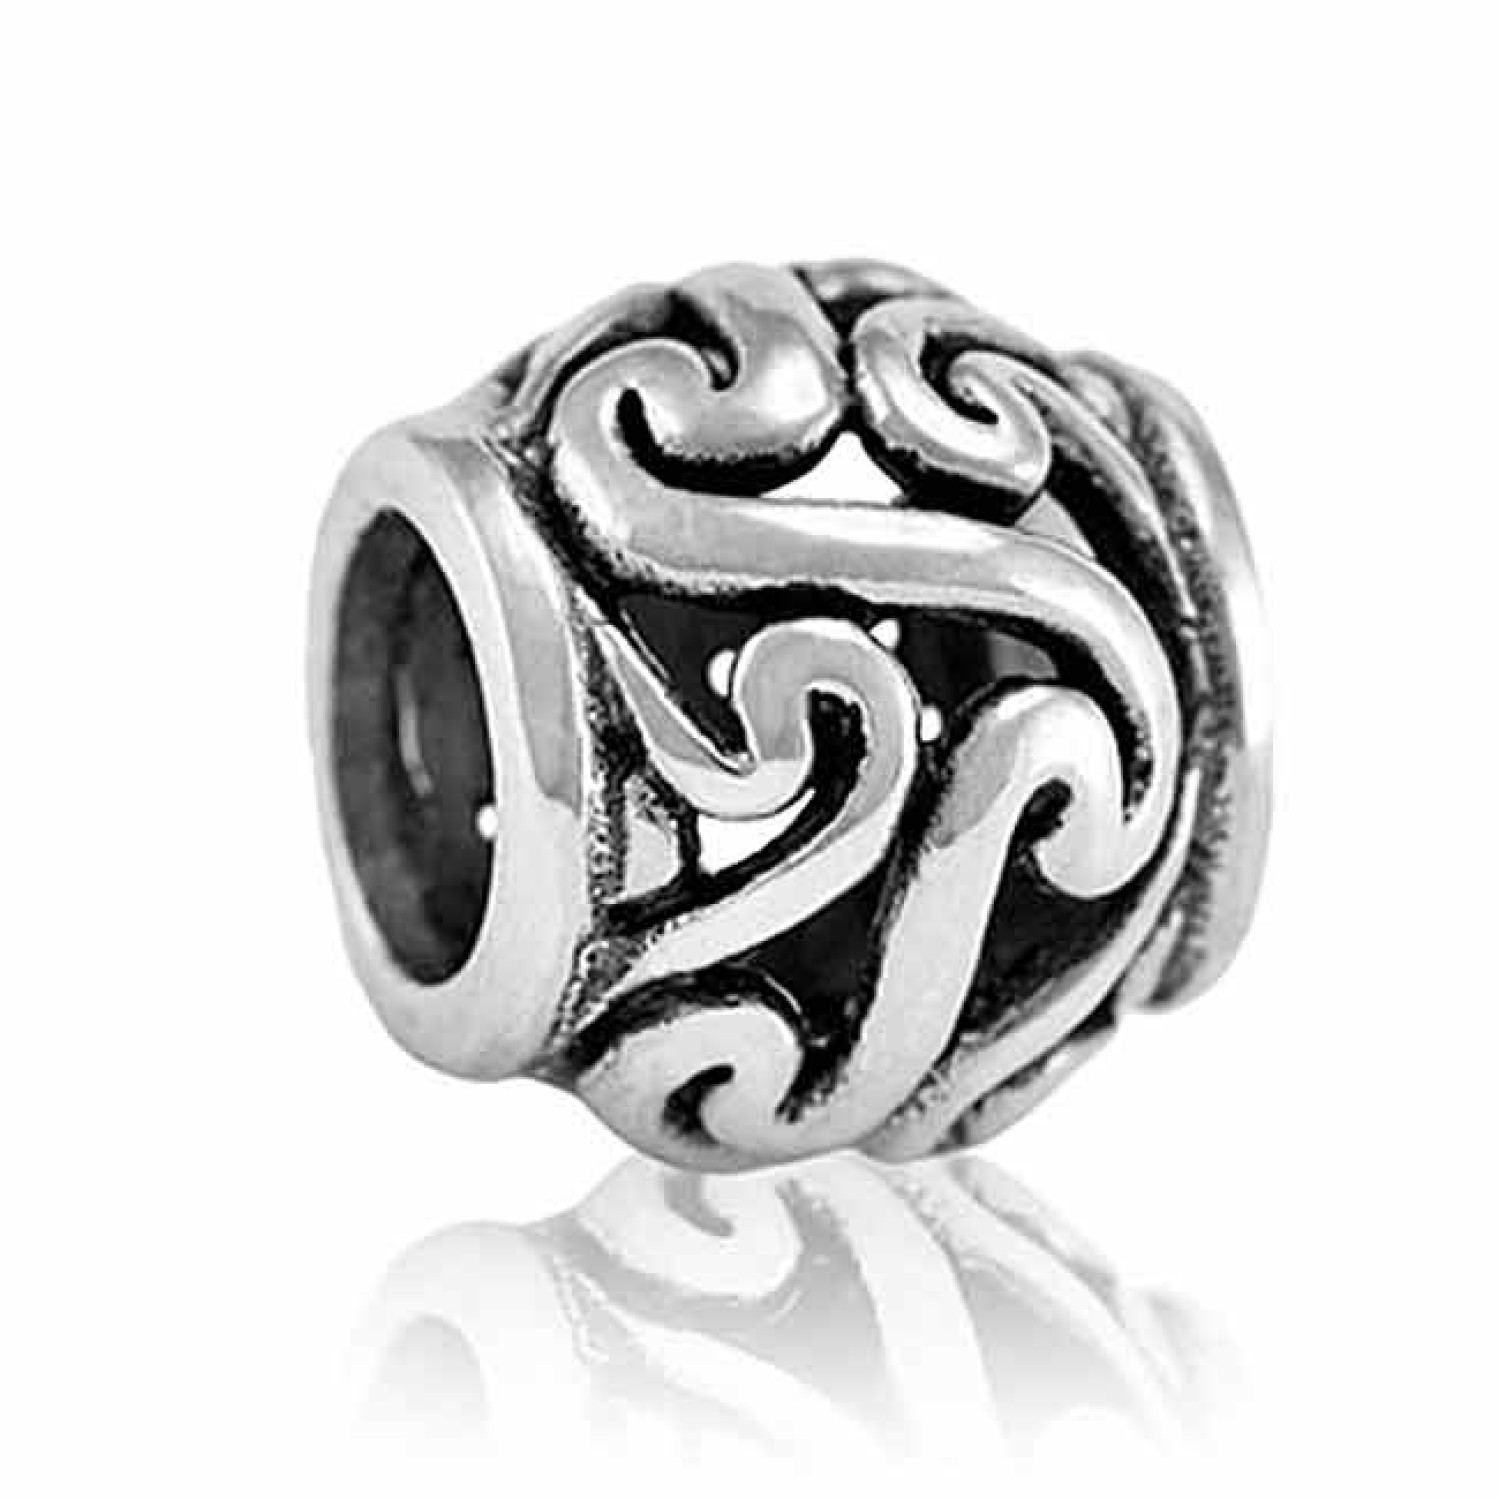 LK169  Evolve  Charm Journeys. LK169  Evolve 925 Sterling Silver Charm Journeys This beautiful Evolve silver charm represents our journey through life, particularly the people and places that shape and enrich our experiences. The scrolling koru d @christi